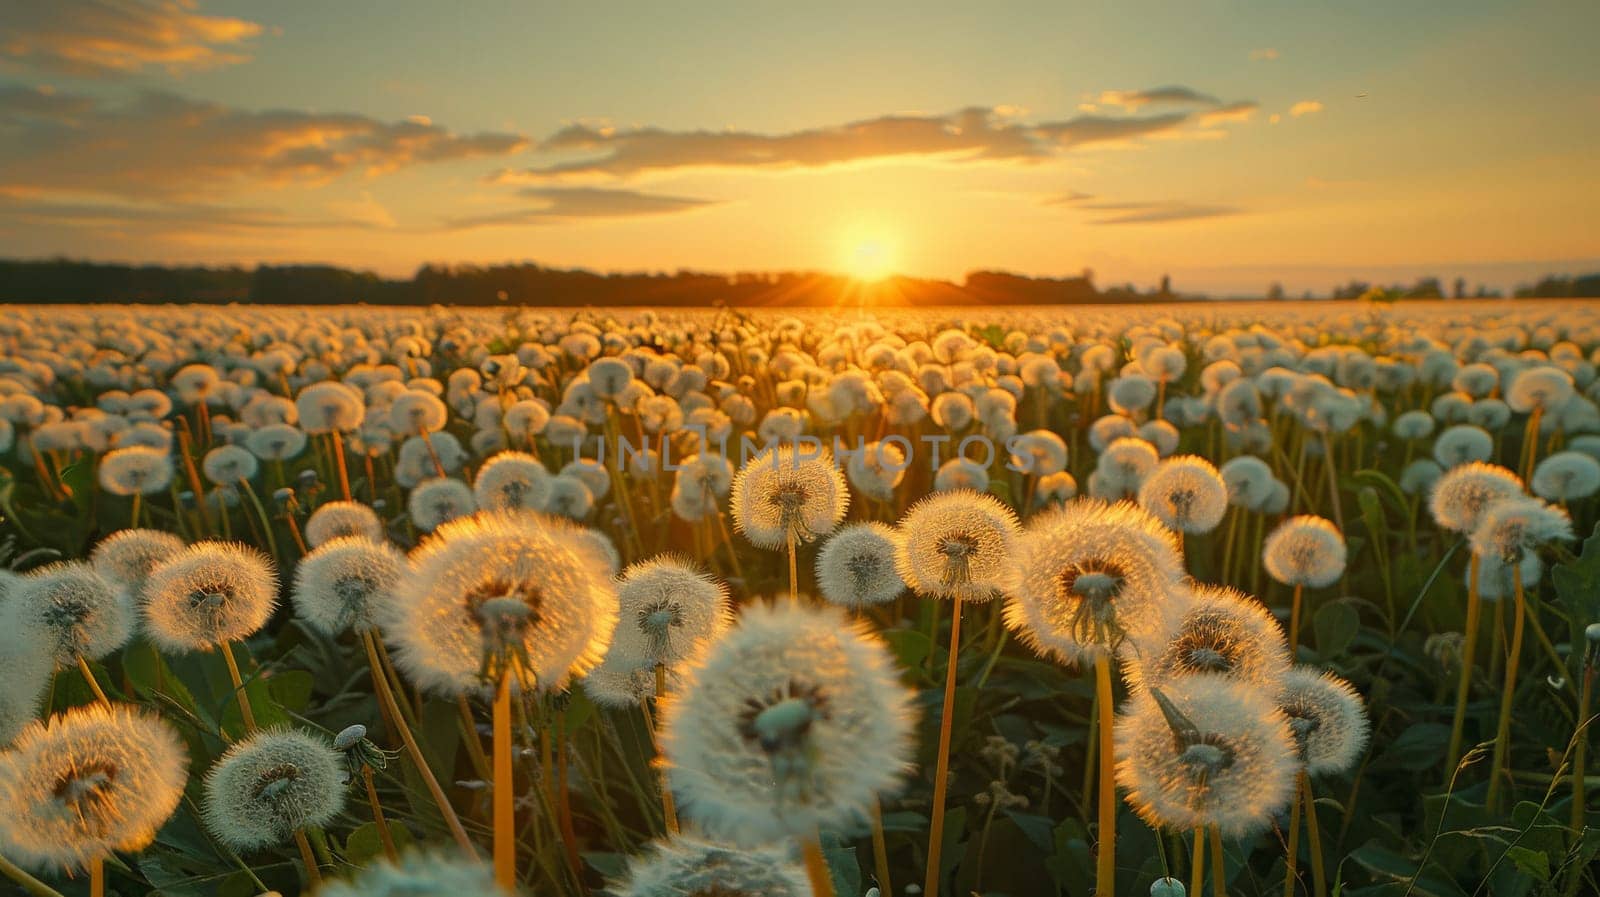 A field of dandelions is in full bloom, with the sun setting in the background by itchaznong